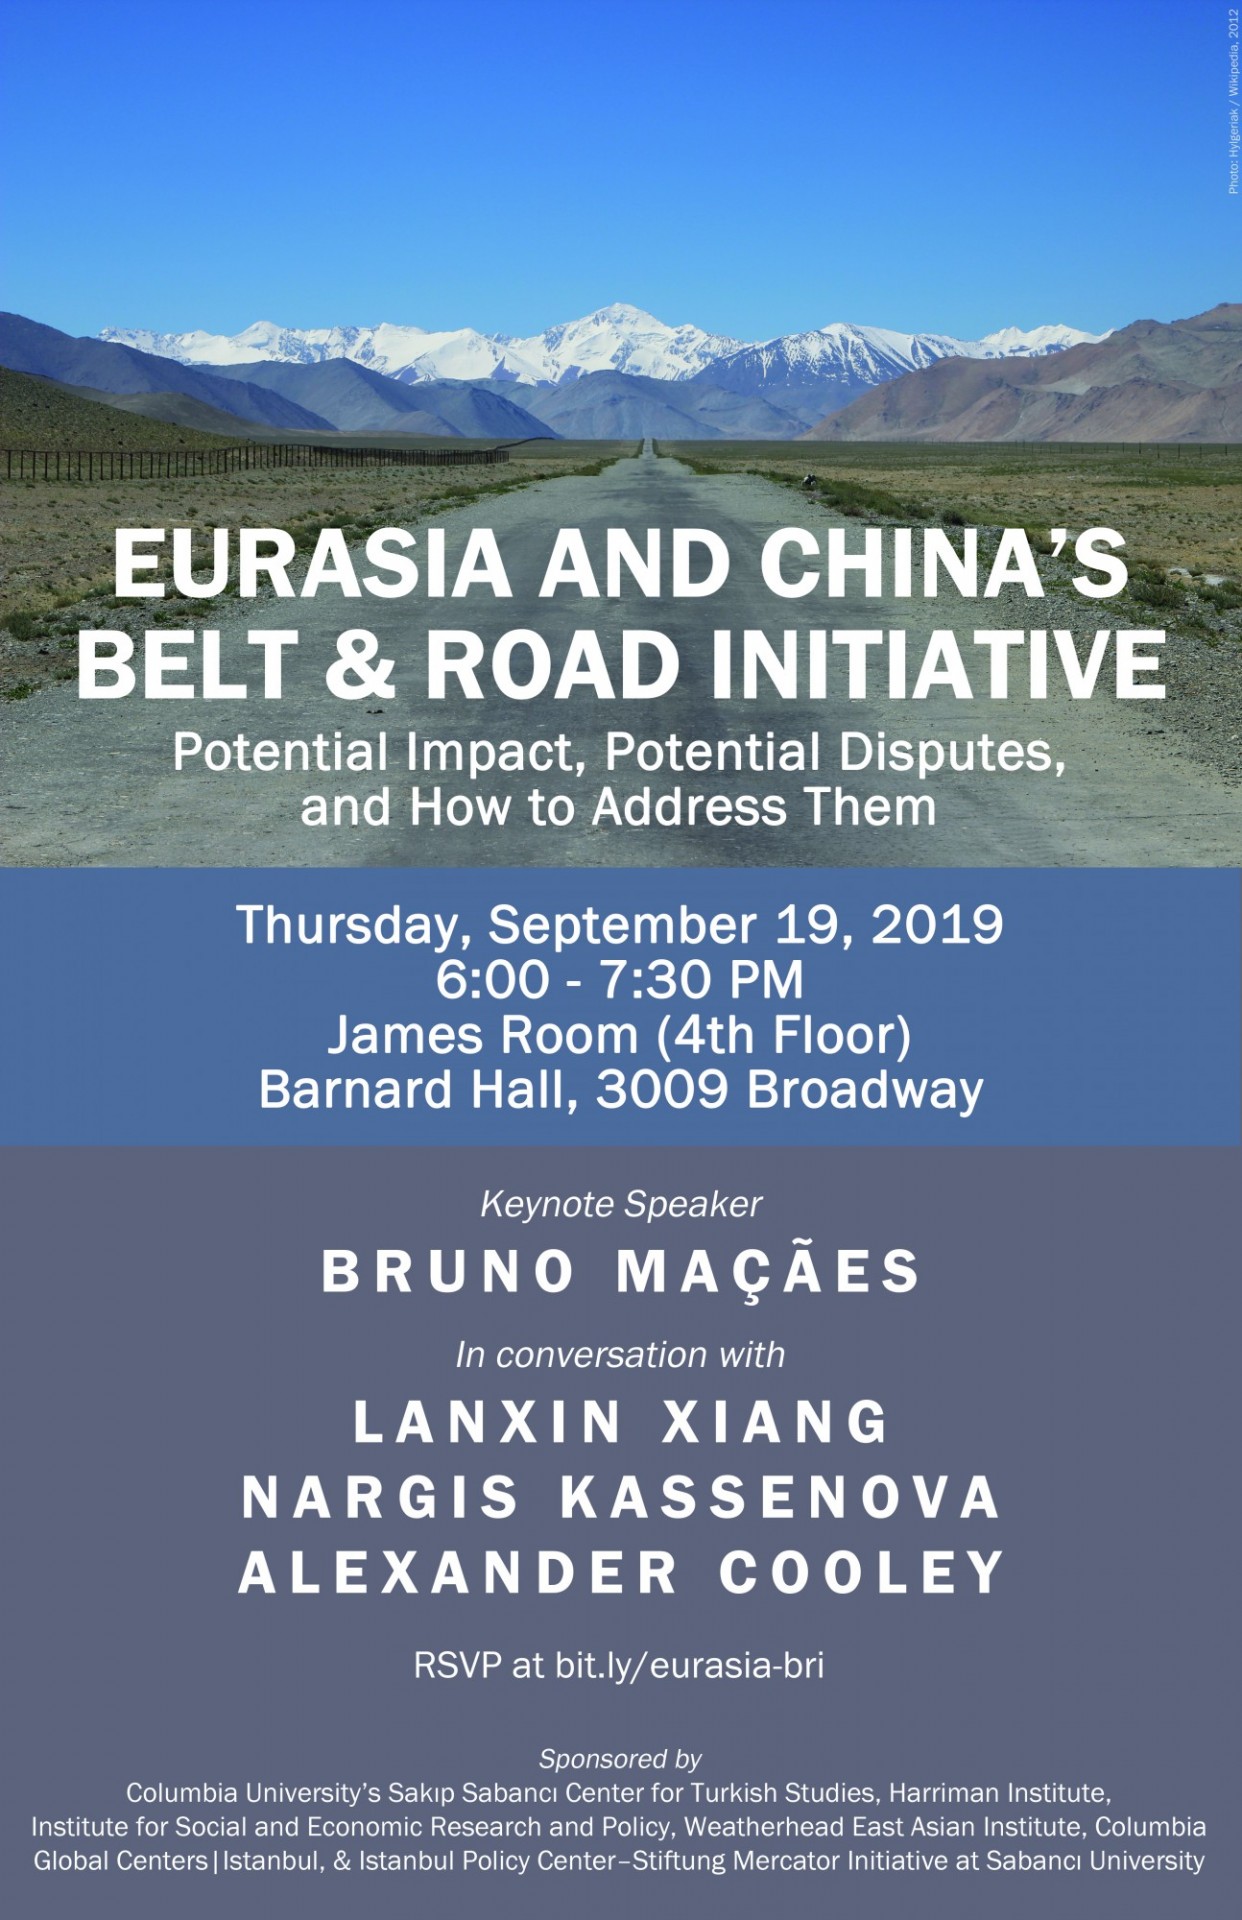 Flyer advertising event "Eurasia and China’s Belt and Road Initiative: Potential Impact, Potential Disputes, and How to Address Them"